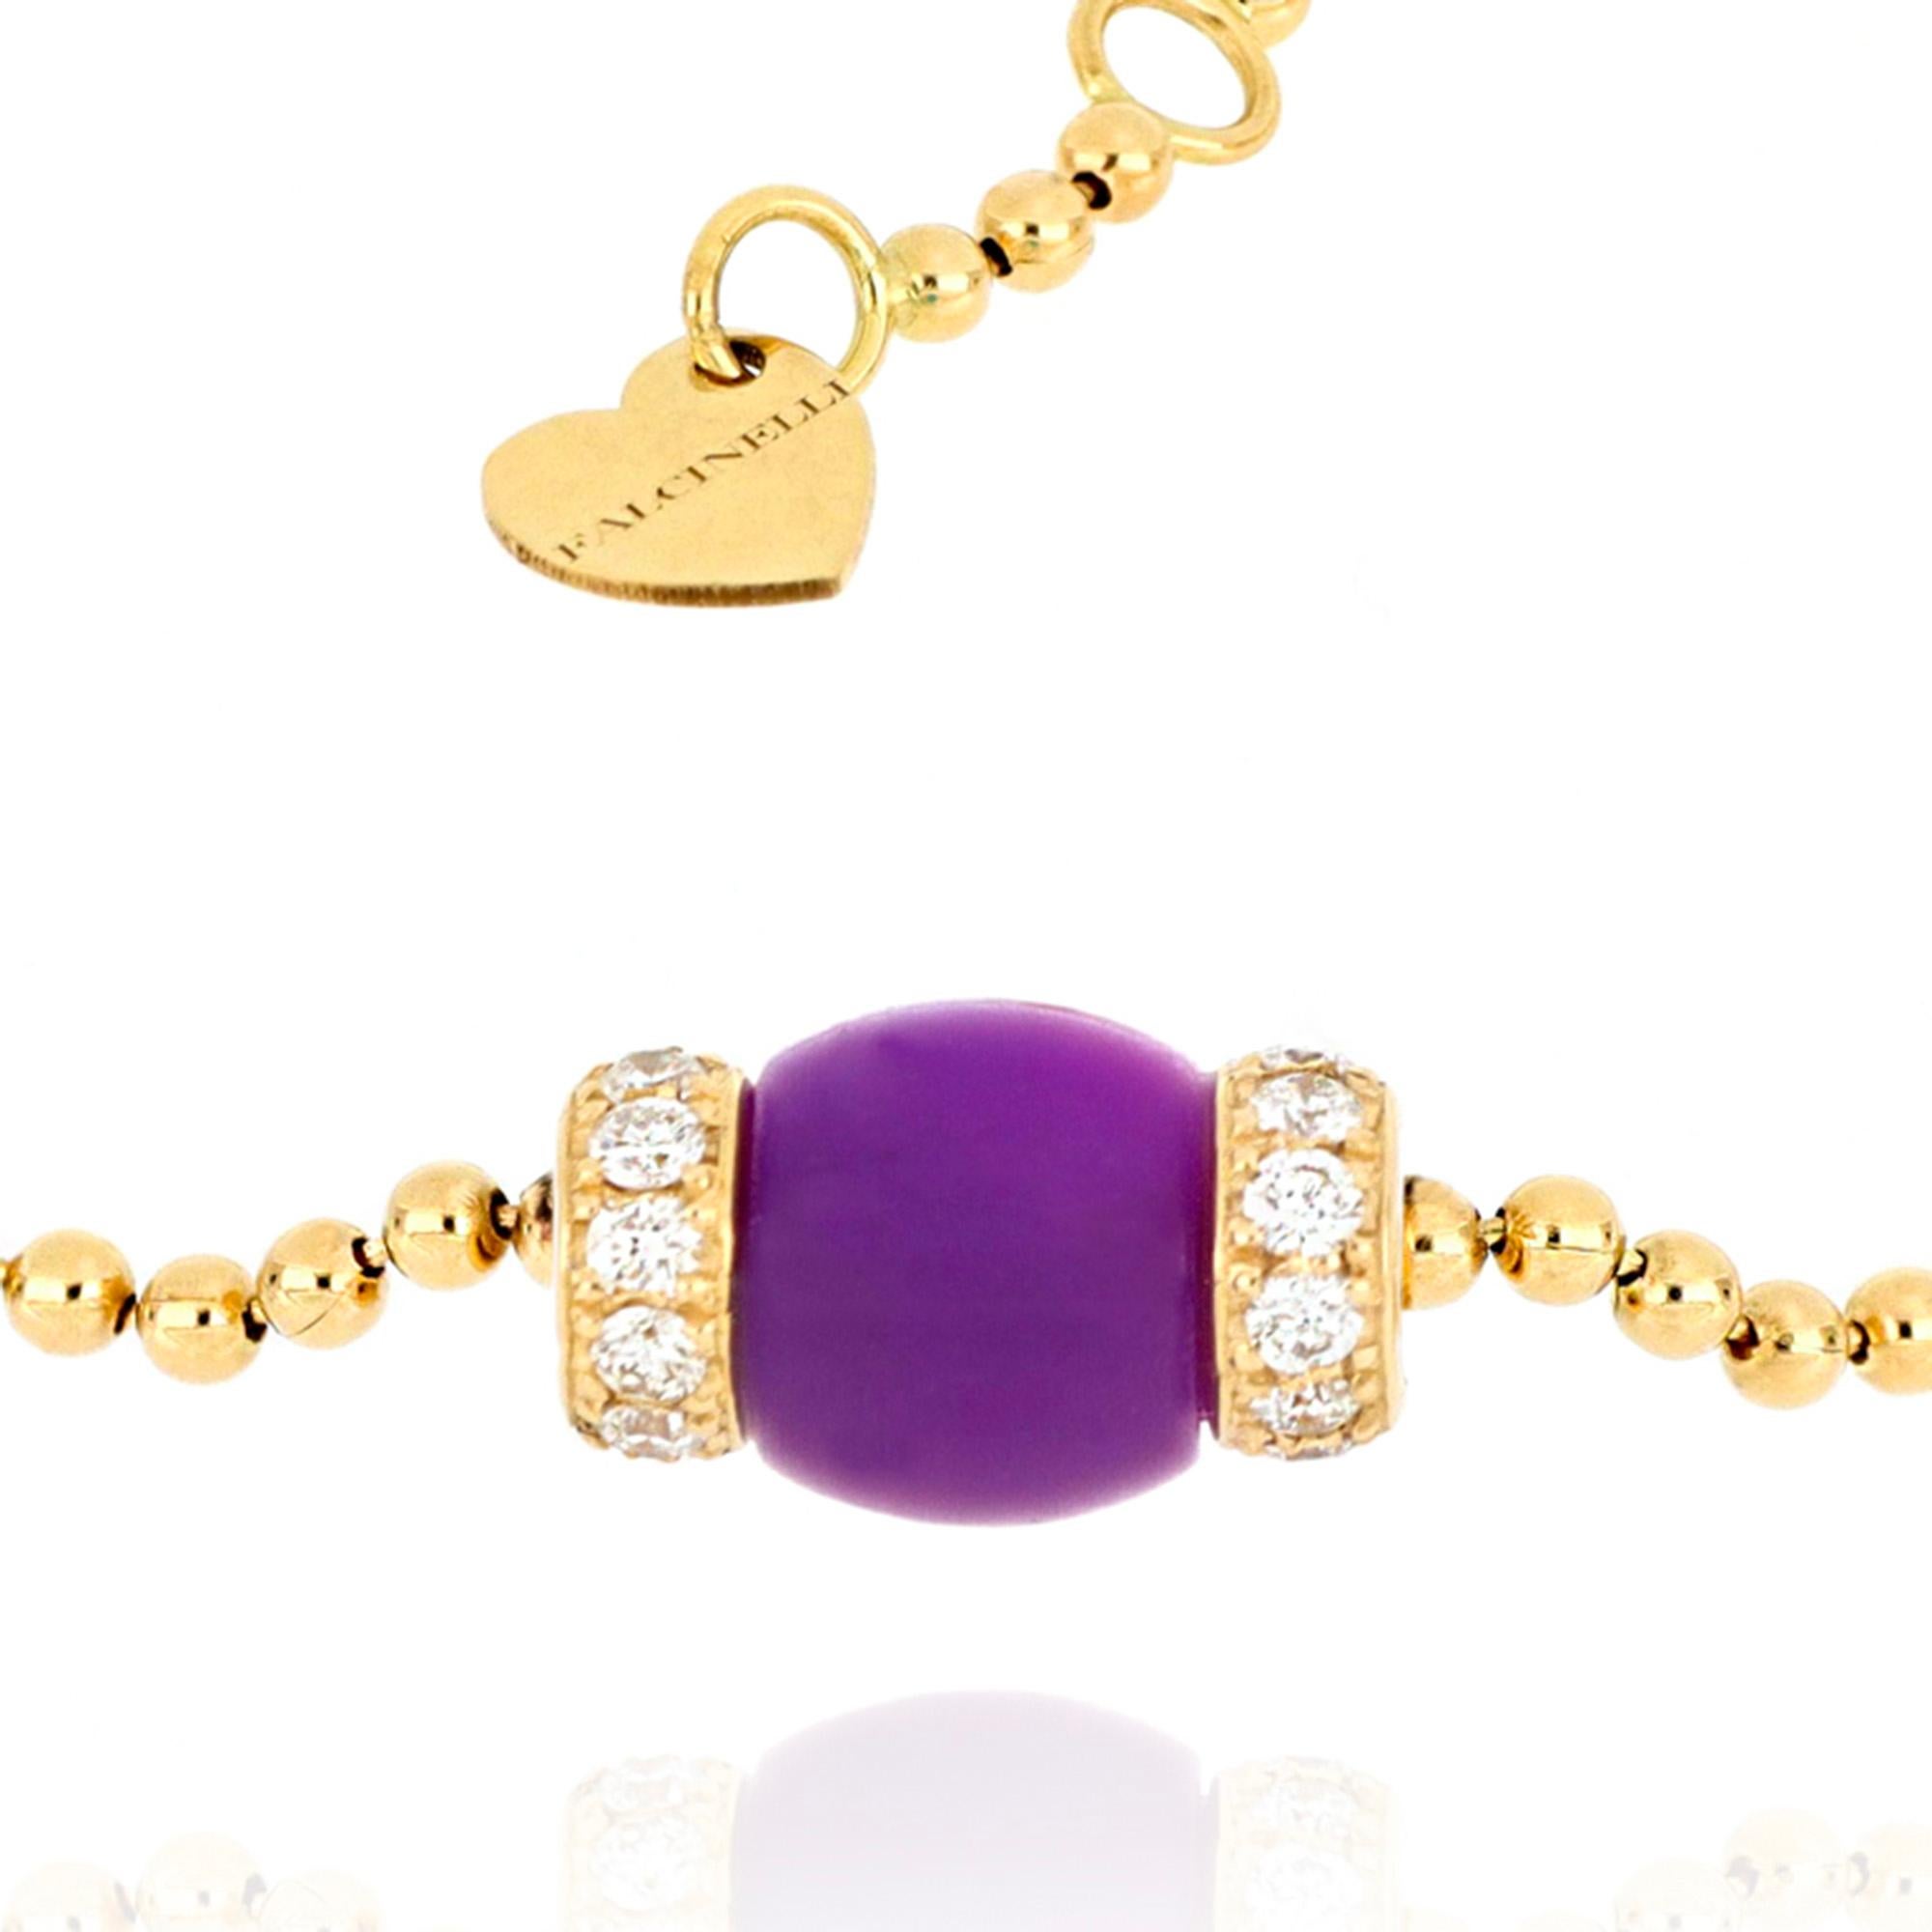 The 18-karat yellow gold ball chain, light and comfortable on the skin, reveals all the craftsmanship with which this bracelet from Le Carrousel collection was designed. The central barrel-shaped pendant is enhanced by the romantic color of purple